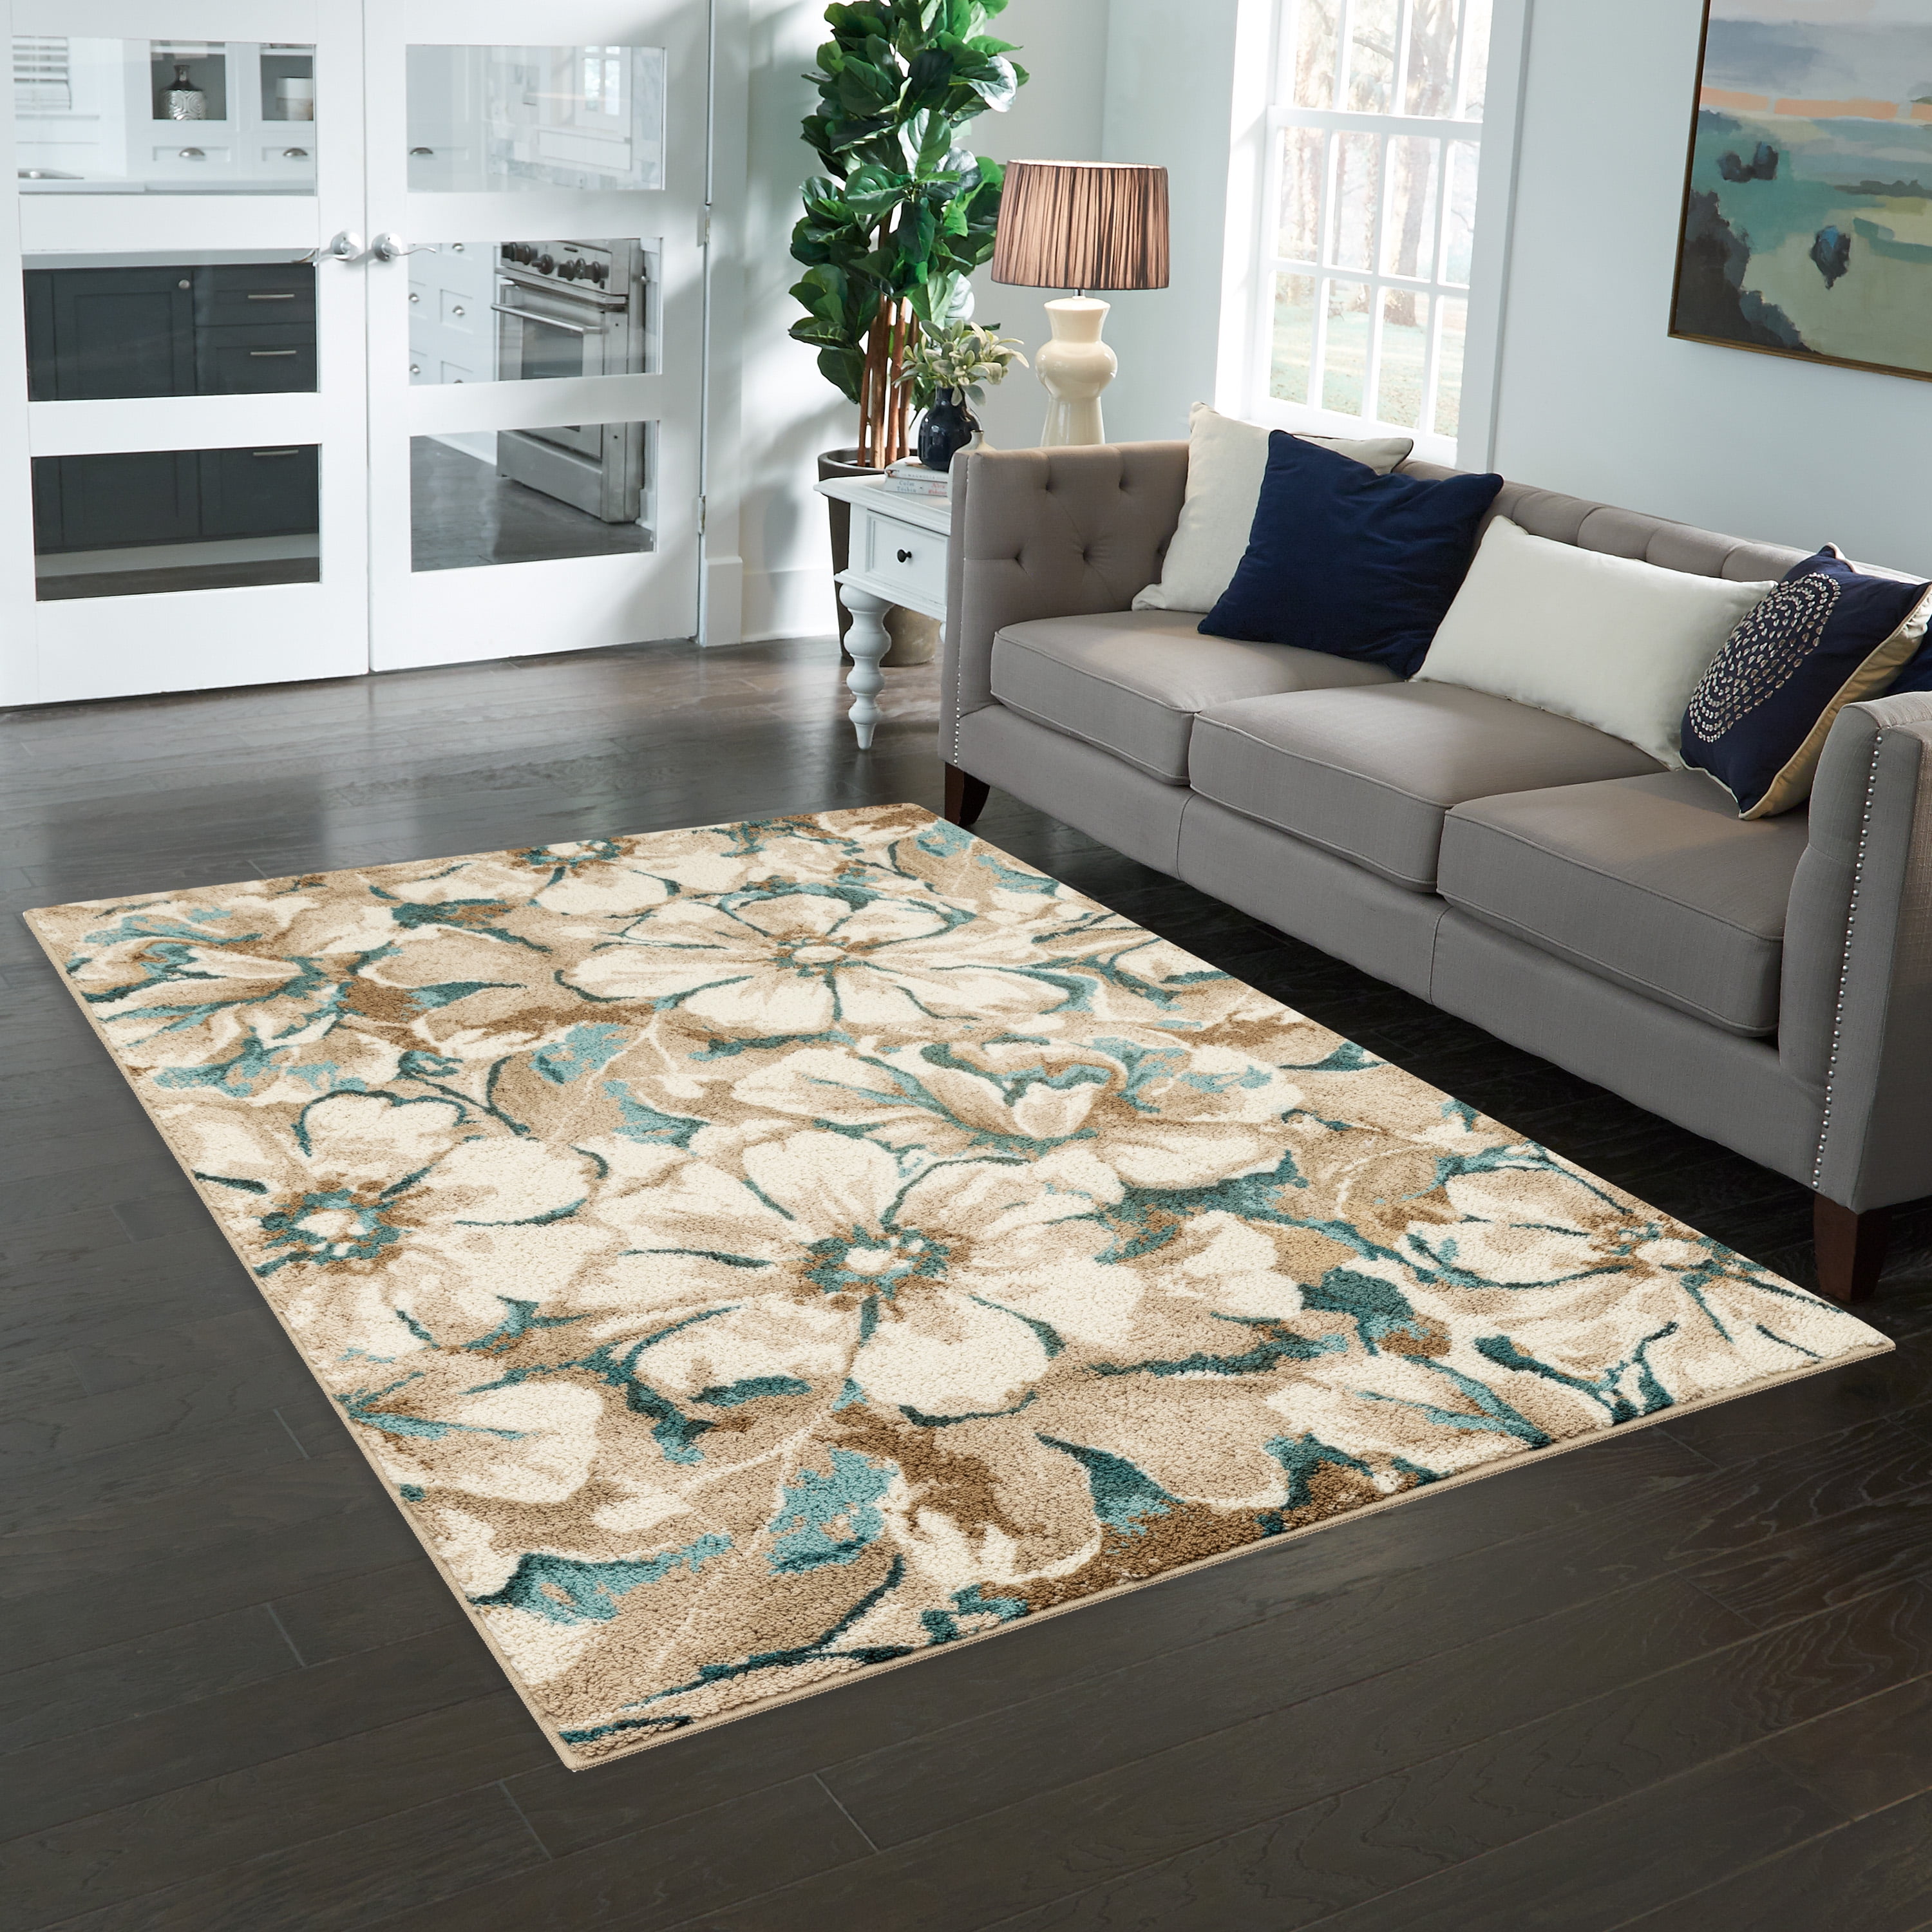 Beige Brown Large Floral Flower Thick Modern Quality Sale Low Cost Area Rugs 